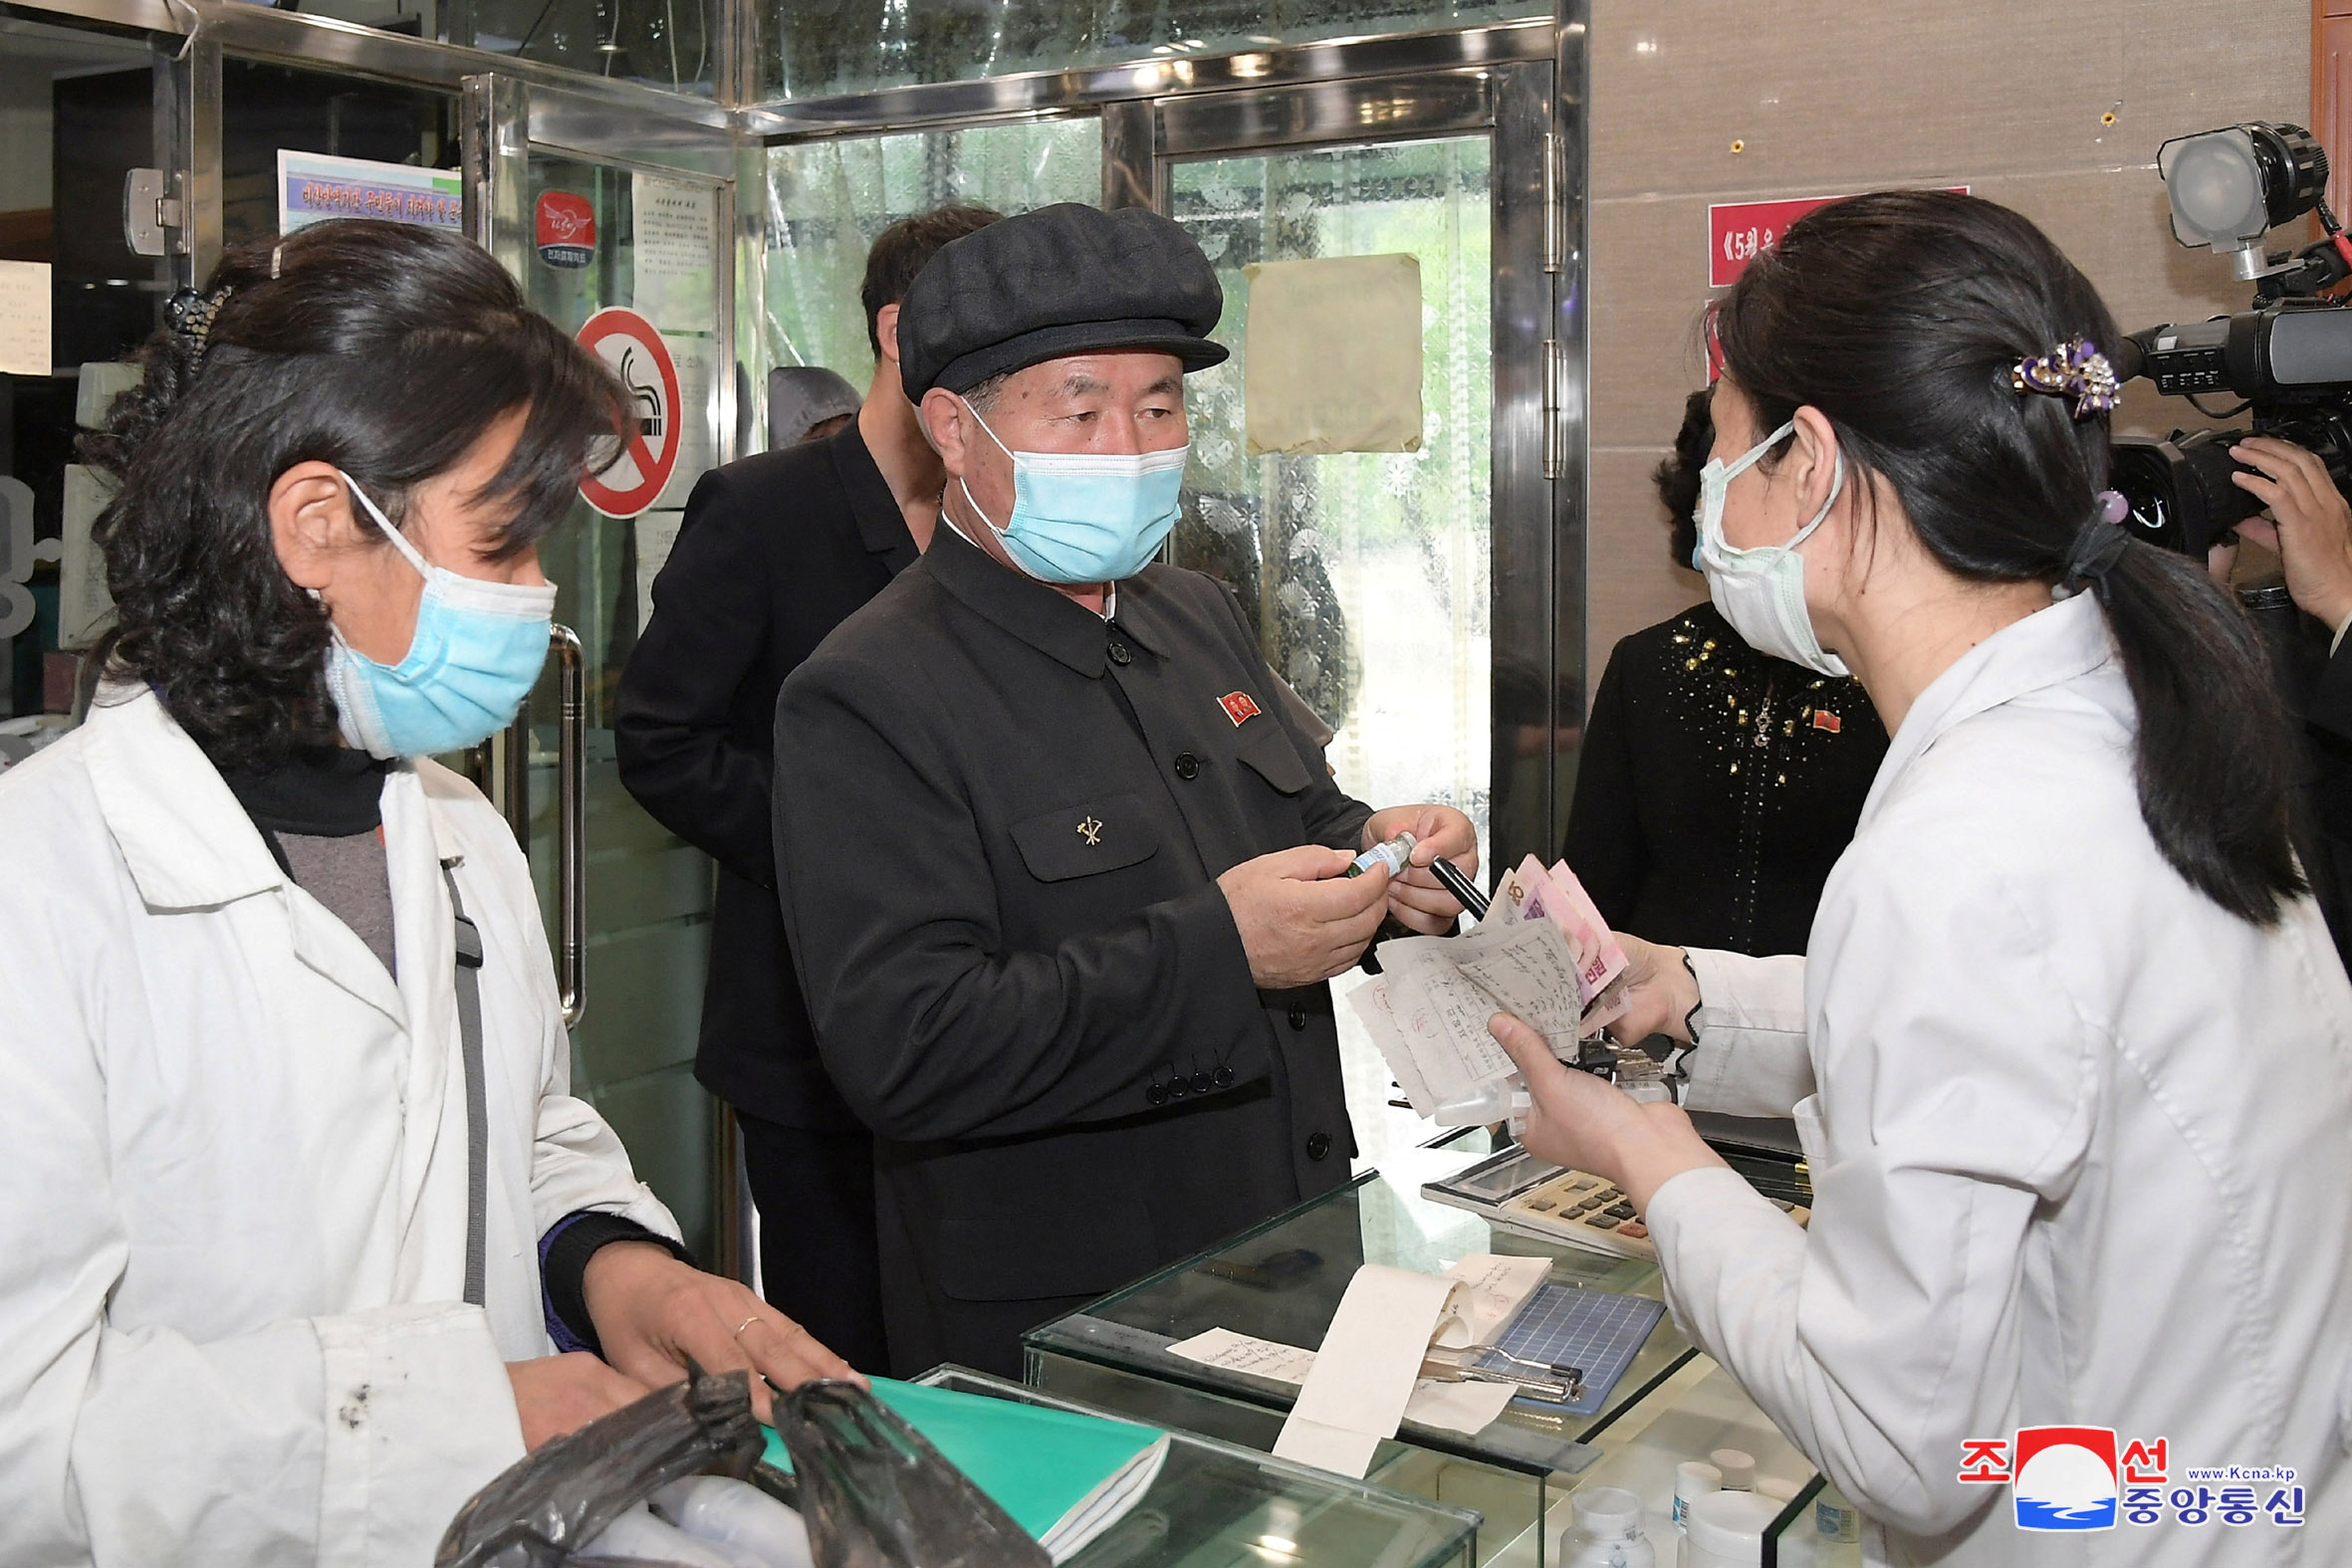 Pak Jong Chon, member of the Presidium of the Political Bureau and secretary of the Central Committee of the Workers' Party of Korea, inspects a pharmacy amid the coronavirus disease (COVID-19) pandemic, in Pyongyang